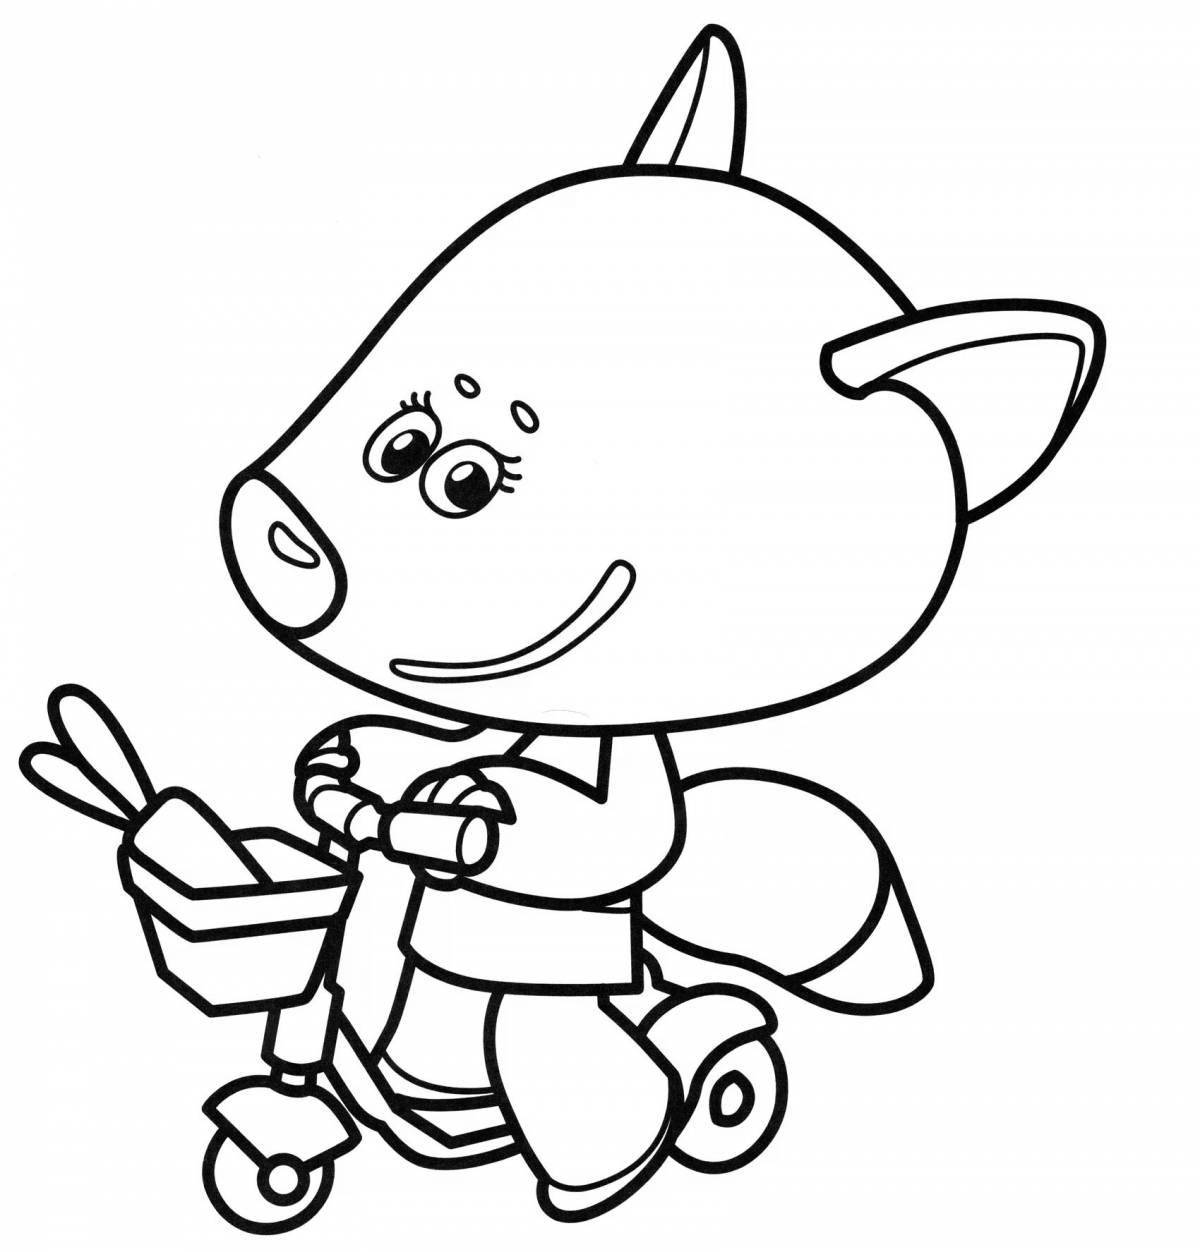 Adorable Bear Coloring Page for Kids